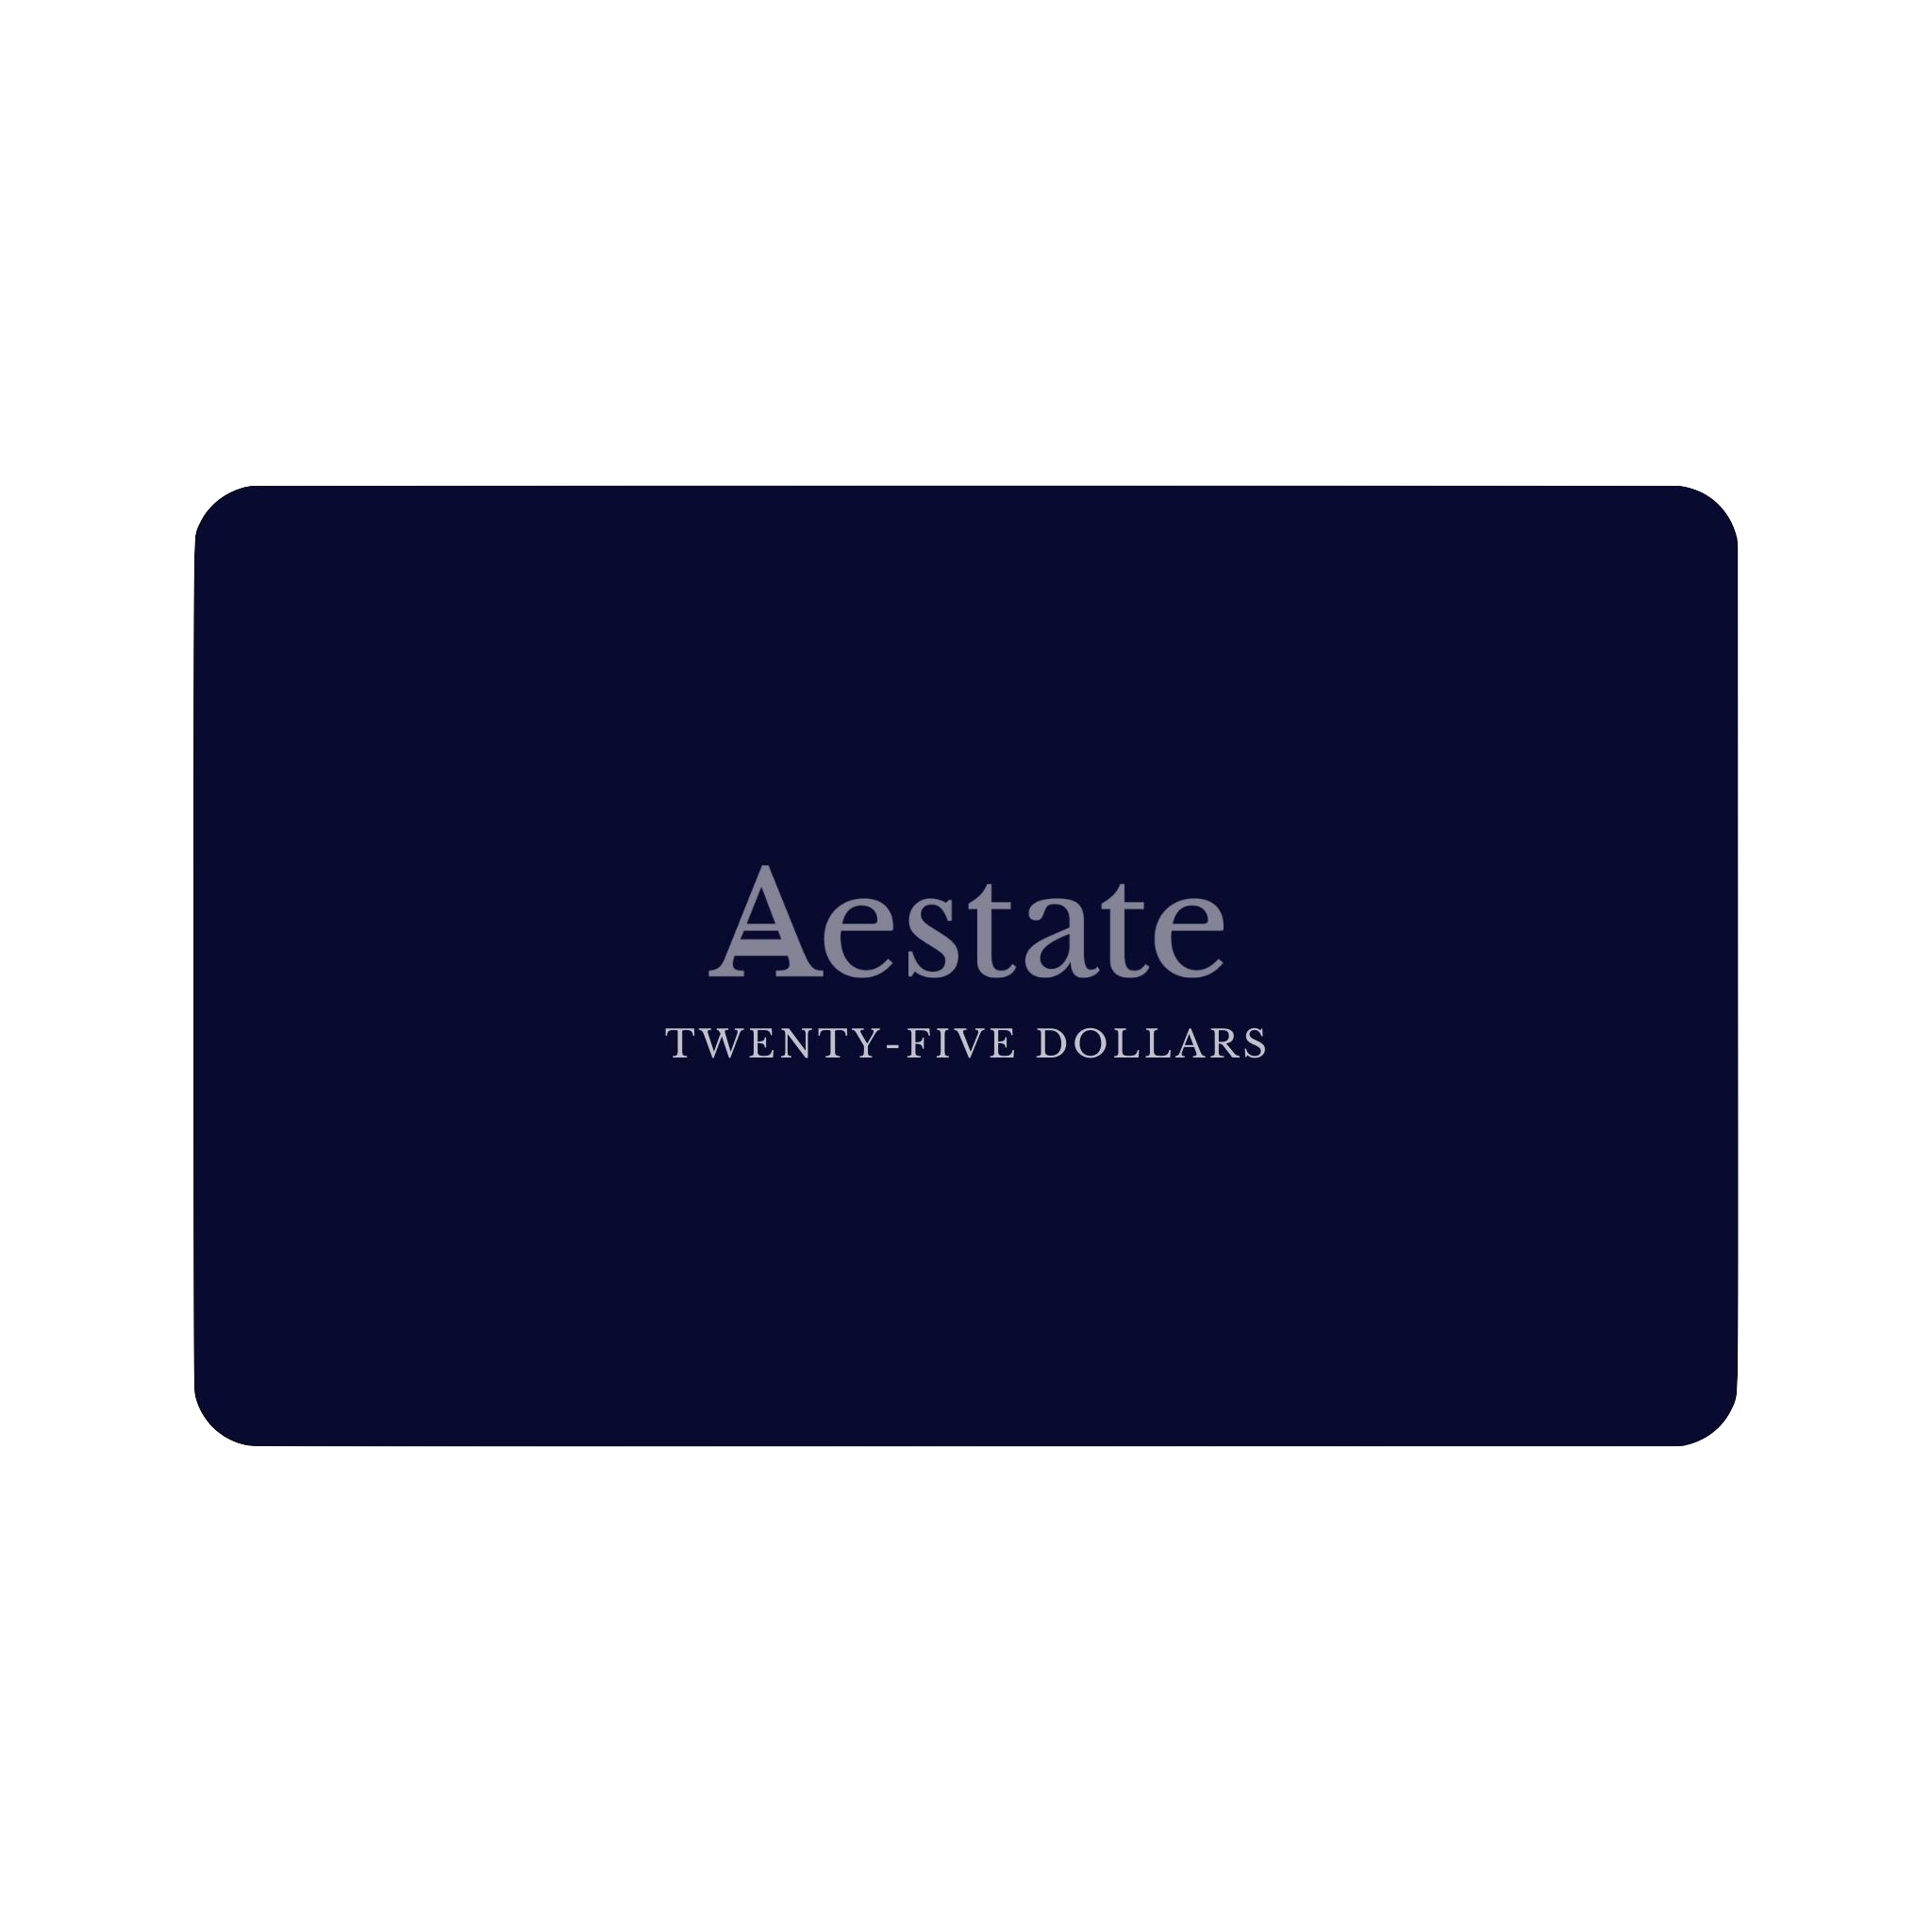 Aestate Gift Card